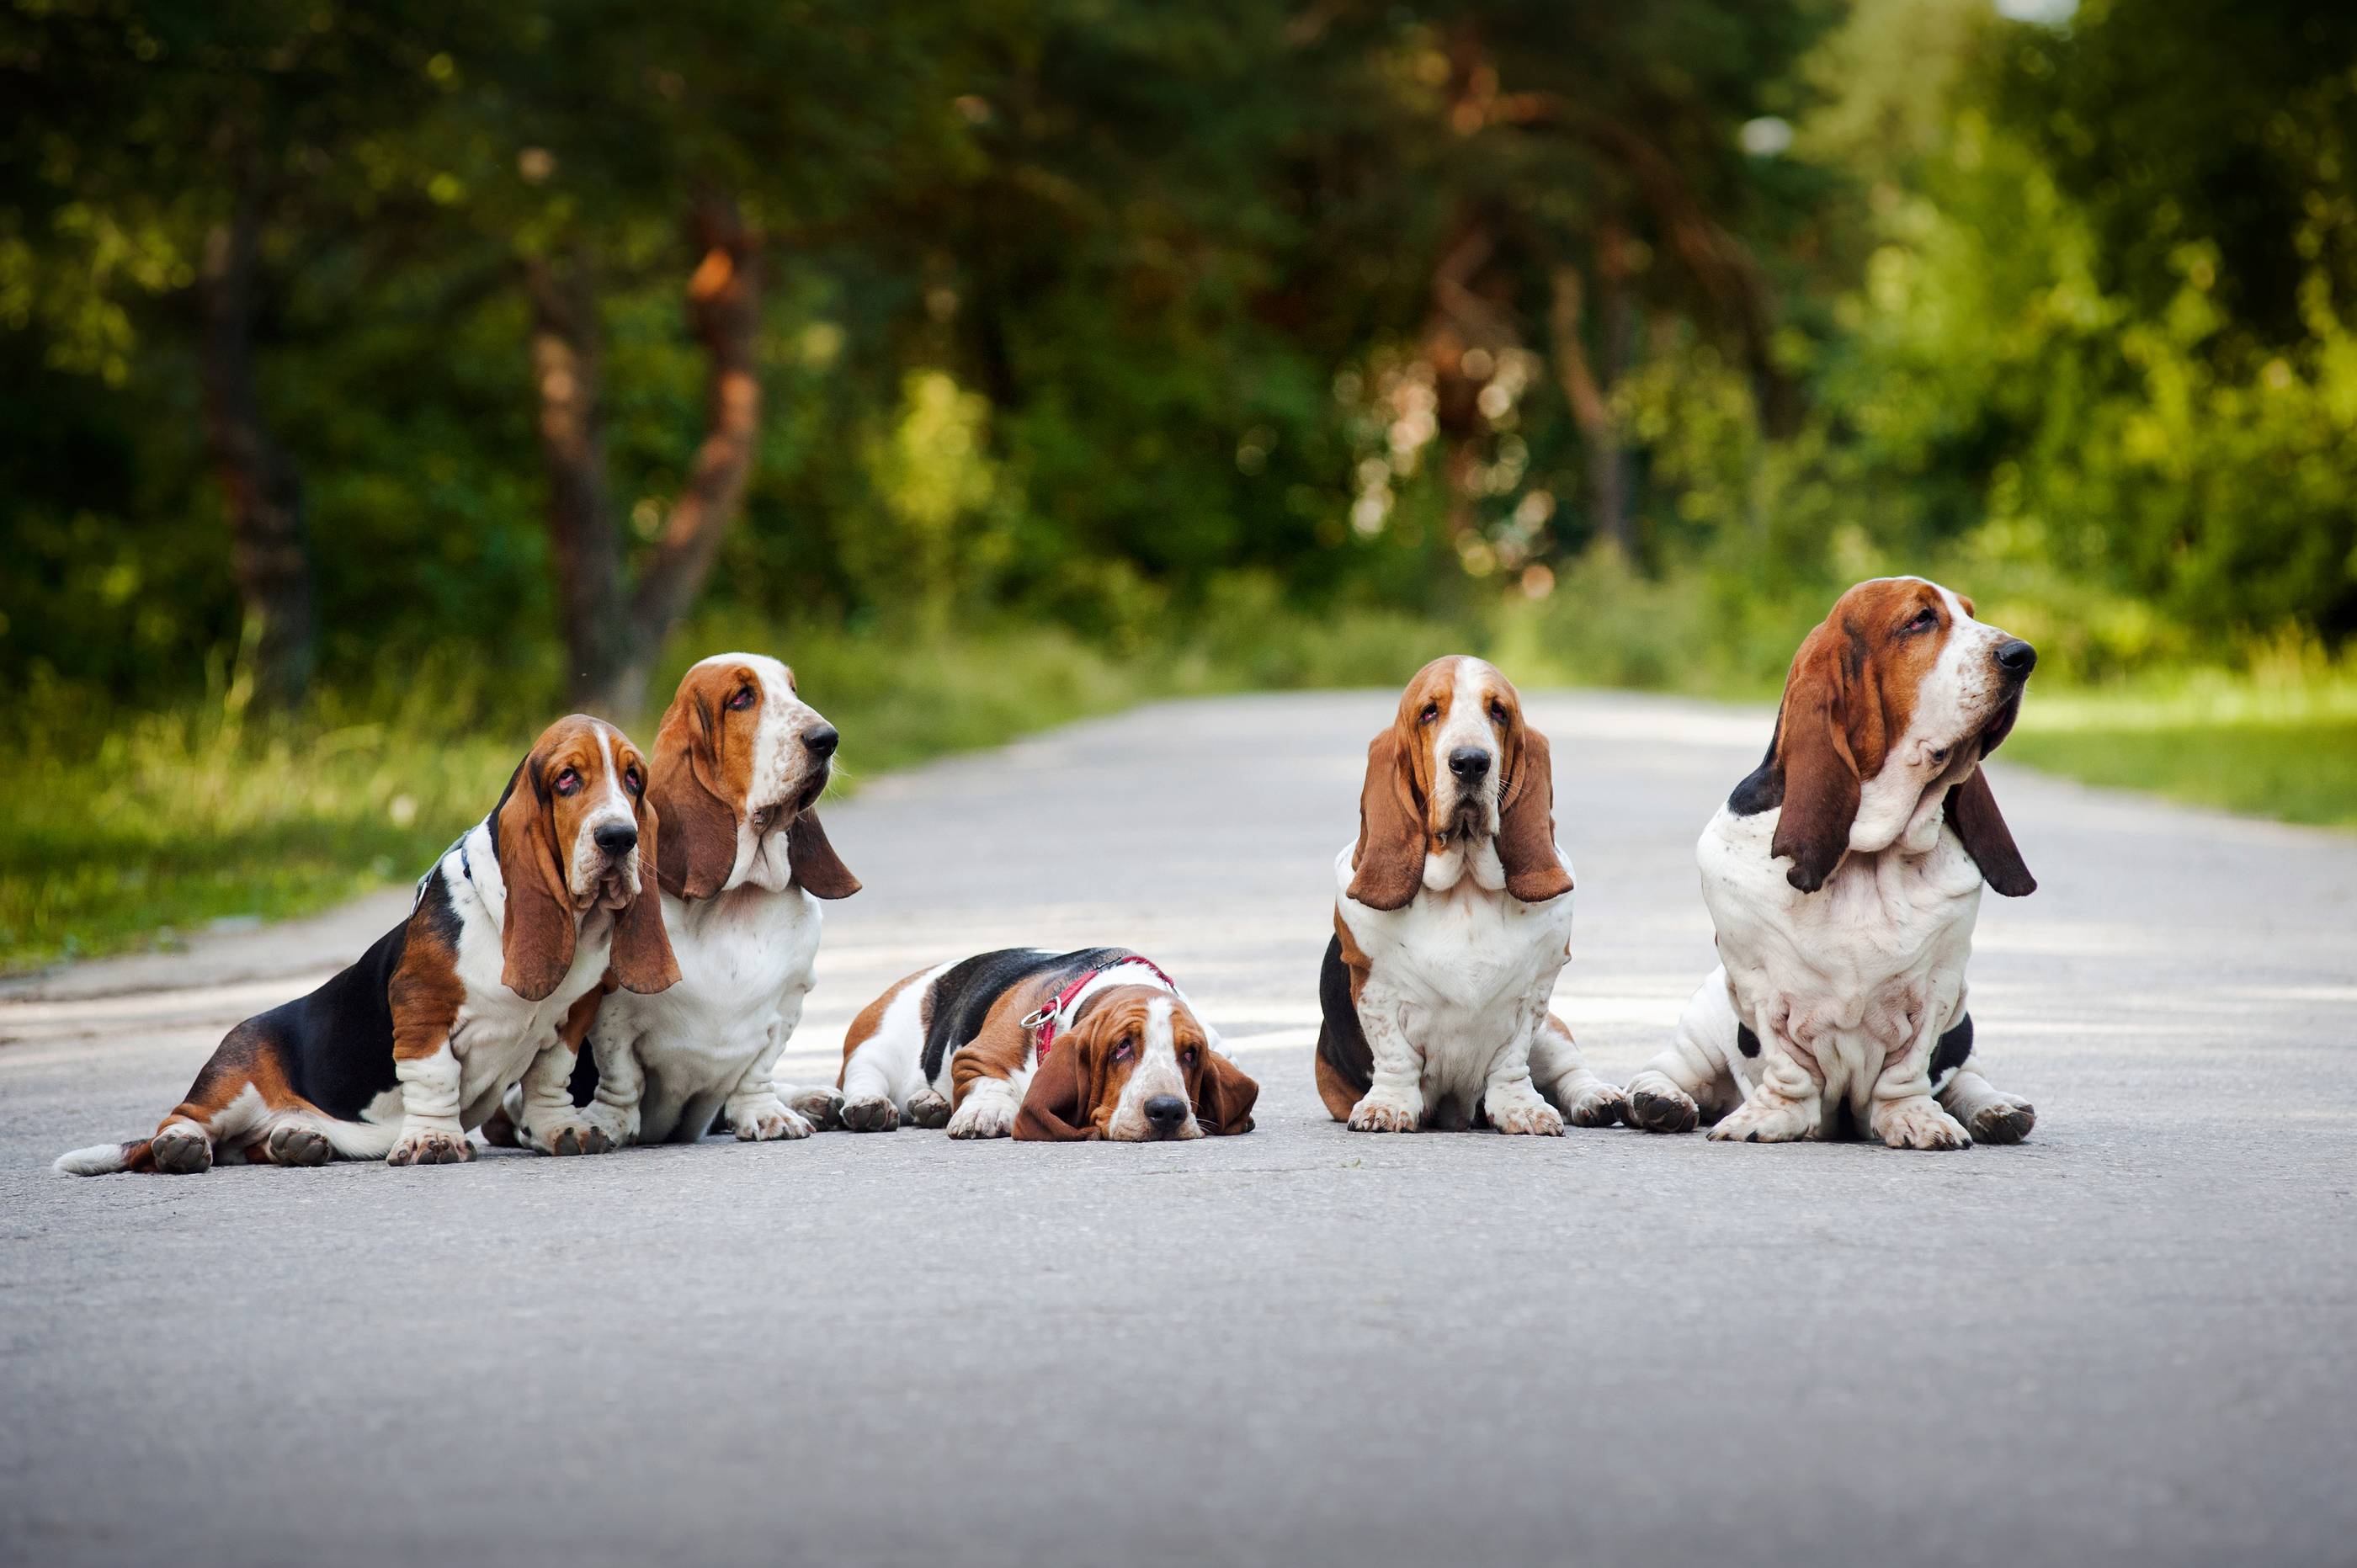 Family Basset Hound sitting on the road wallpaper and image